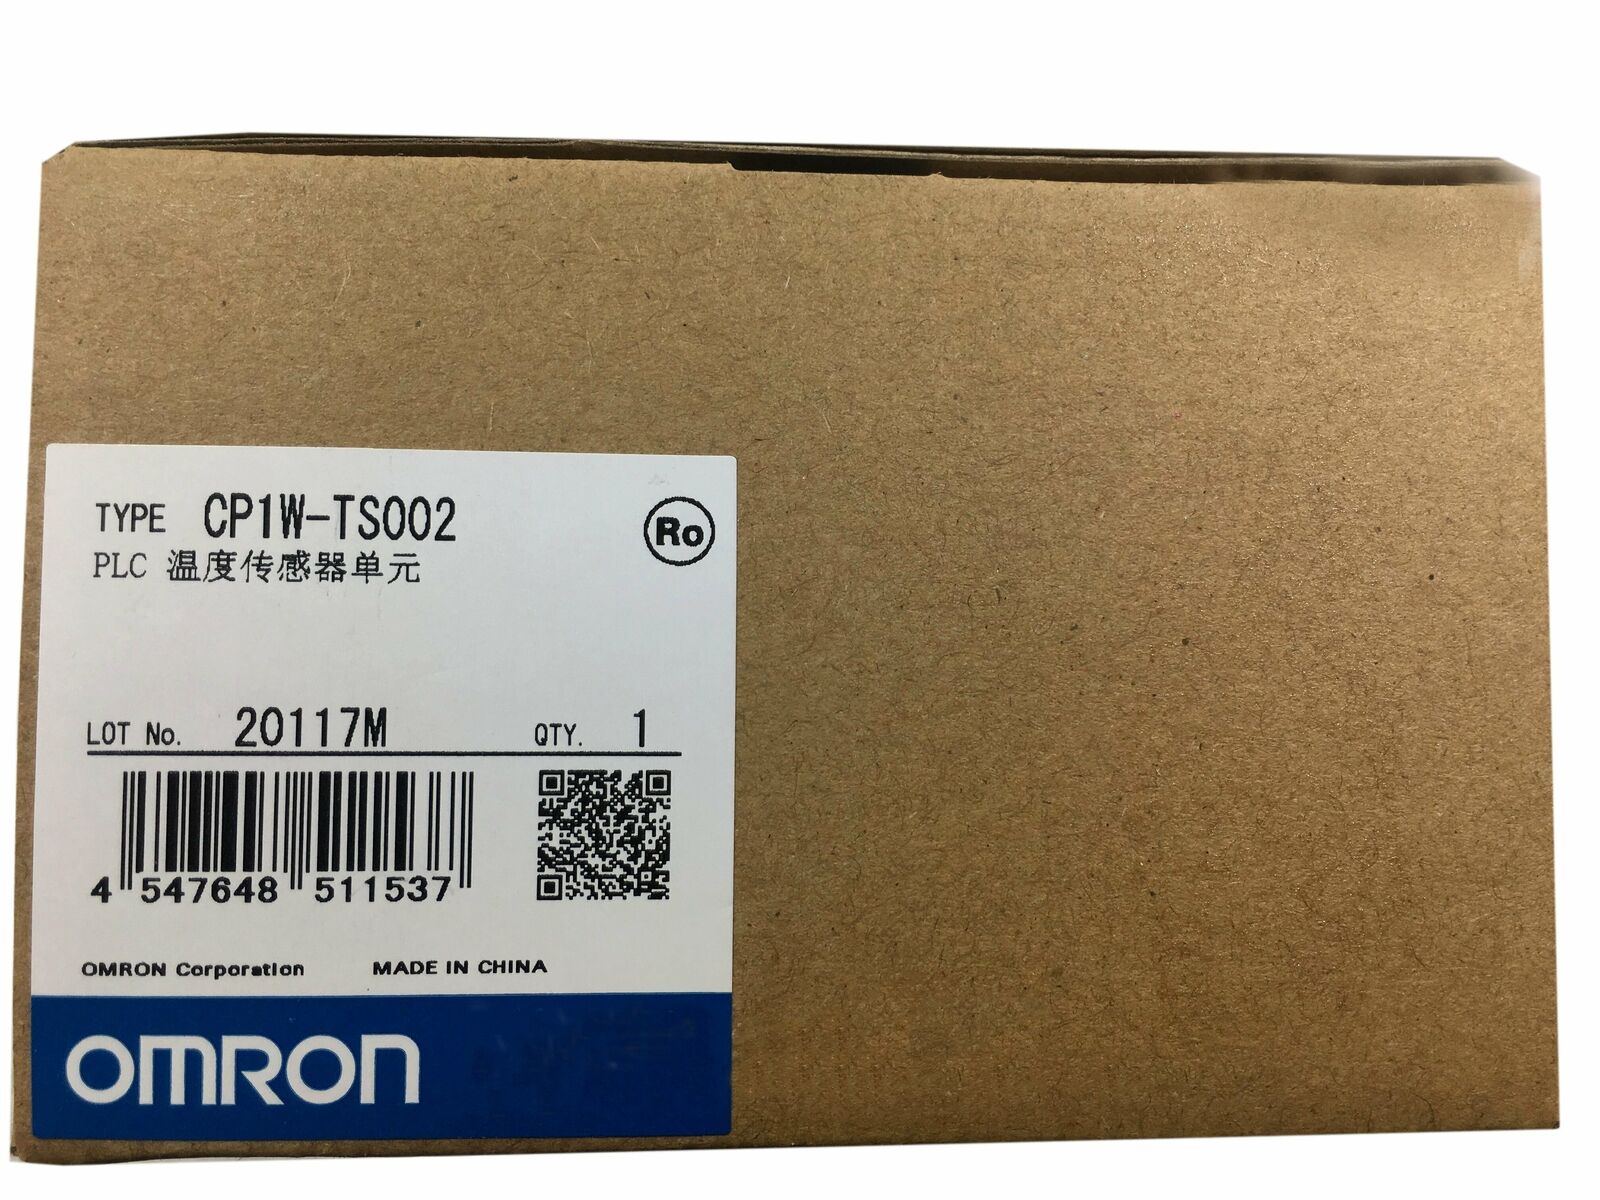 1Pc new Omron temperature module sensor CP1W-TS002 one year warranty KOEED 201-500, 80%, import_2020_10_10_031751, Omron, Other